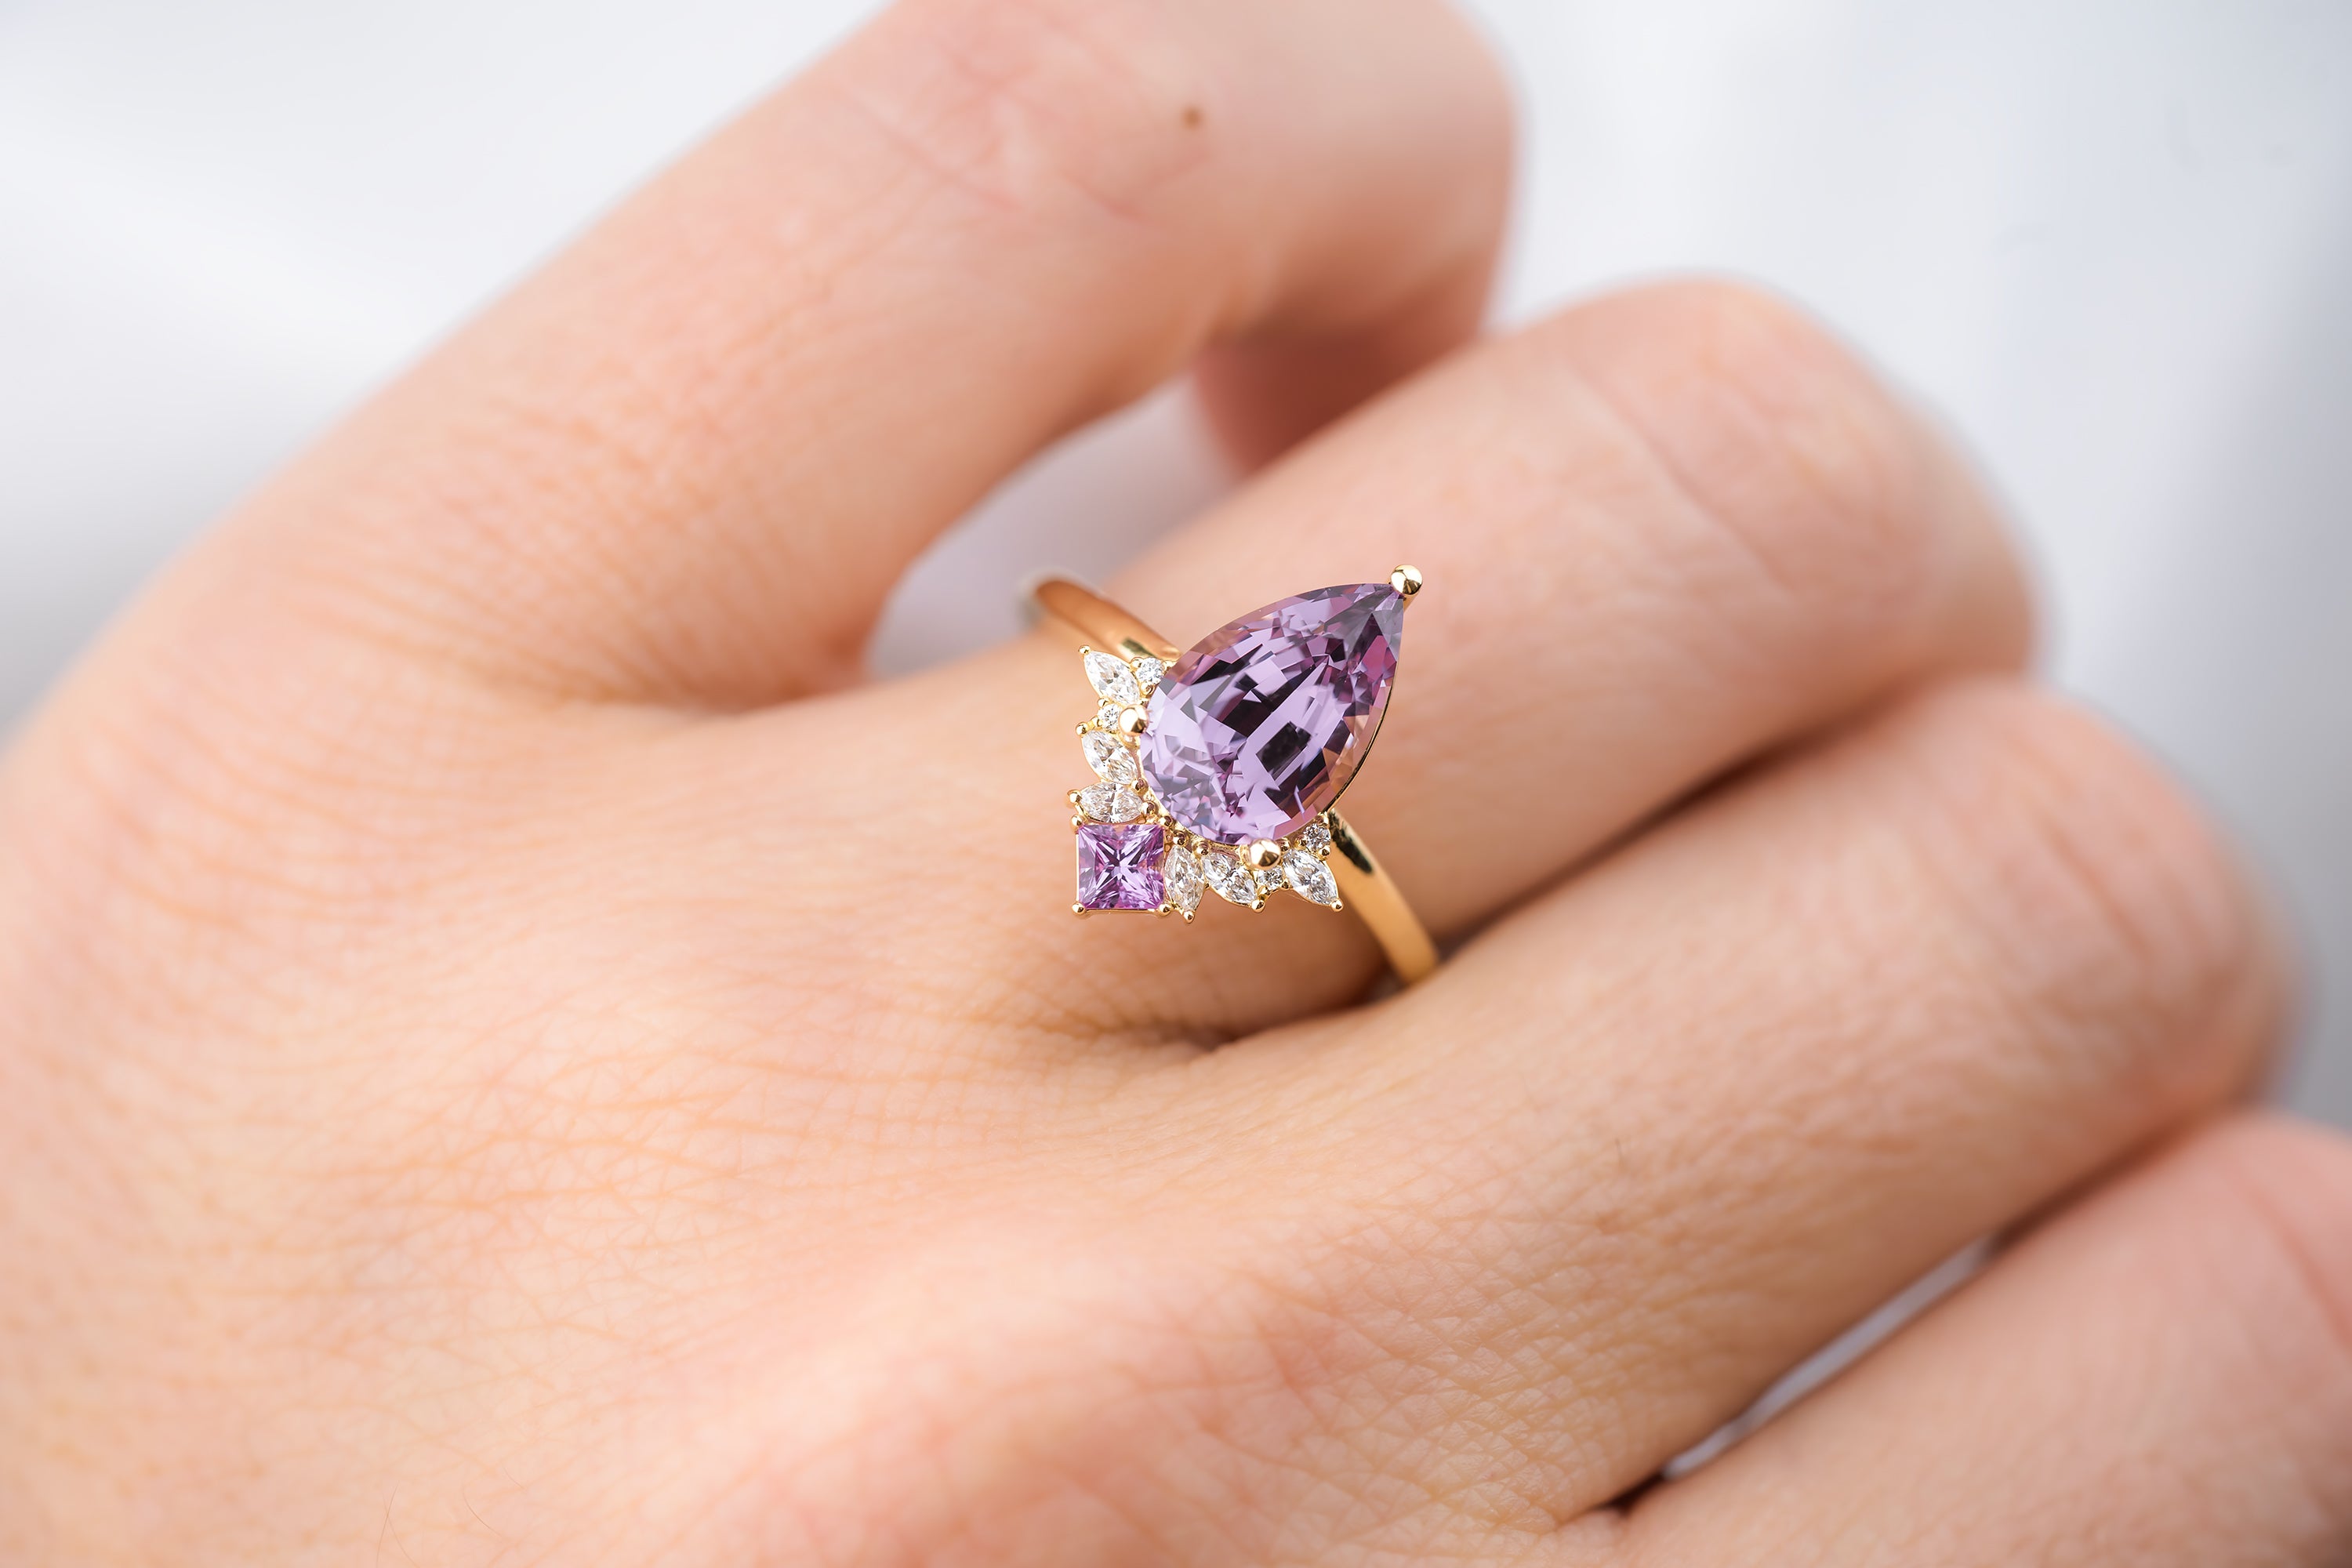 Purple Amethyst engagement ring-Solid 14k White gold-handmade diamond ring-Butterfly  flower-6x8mm Oval cut gemstone promise ring